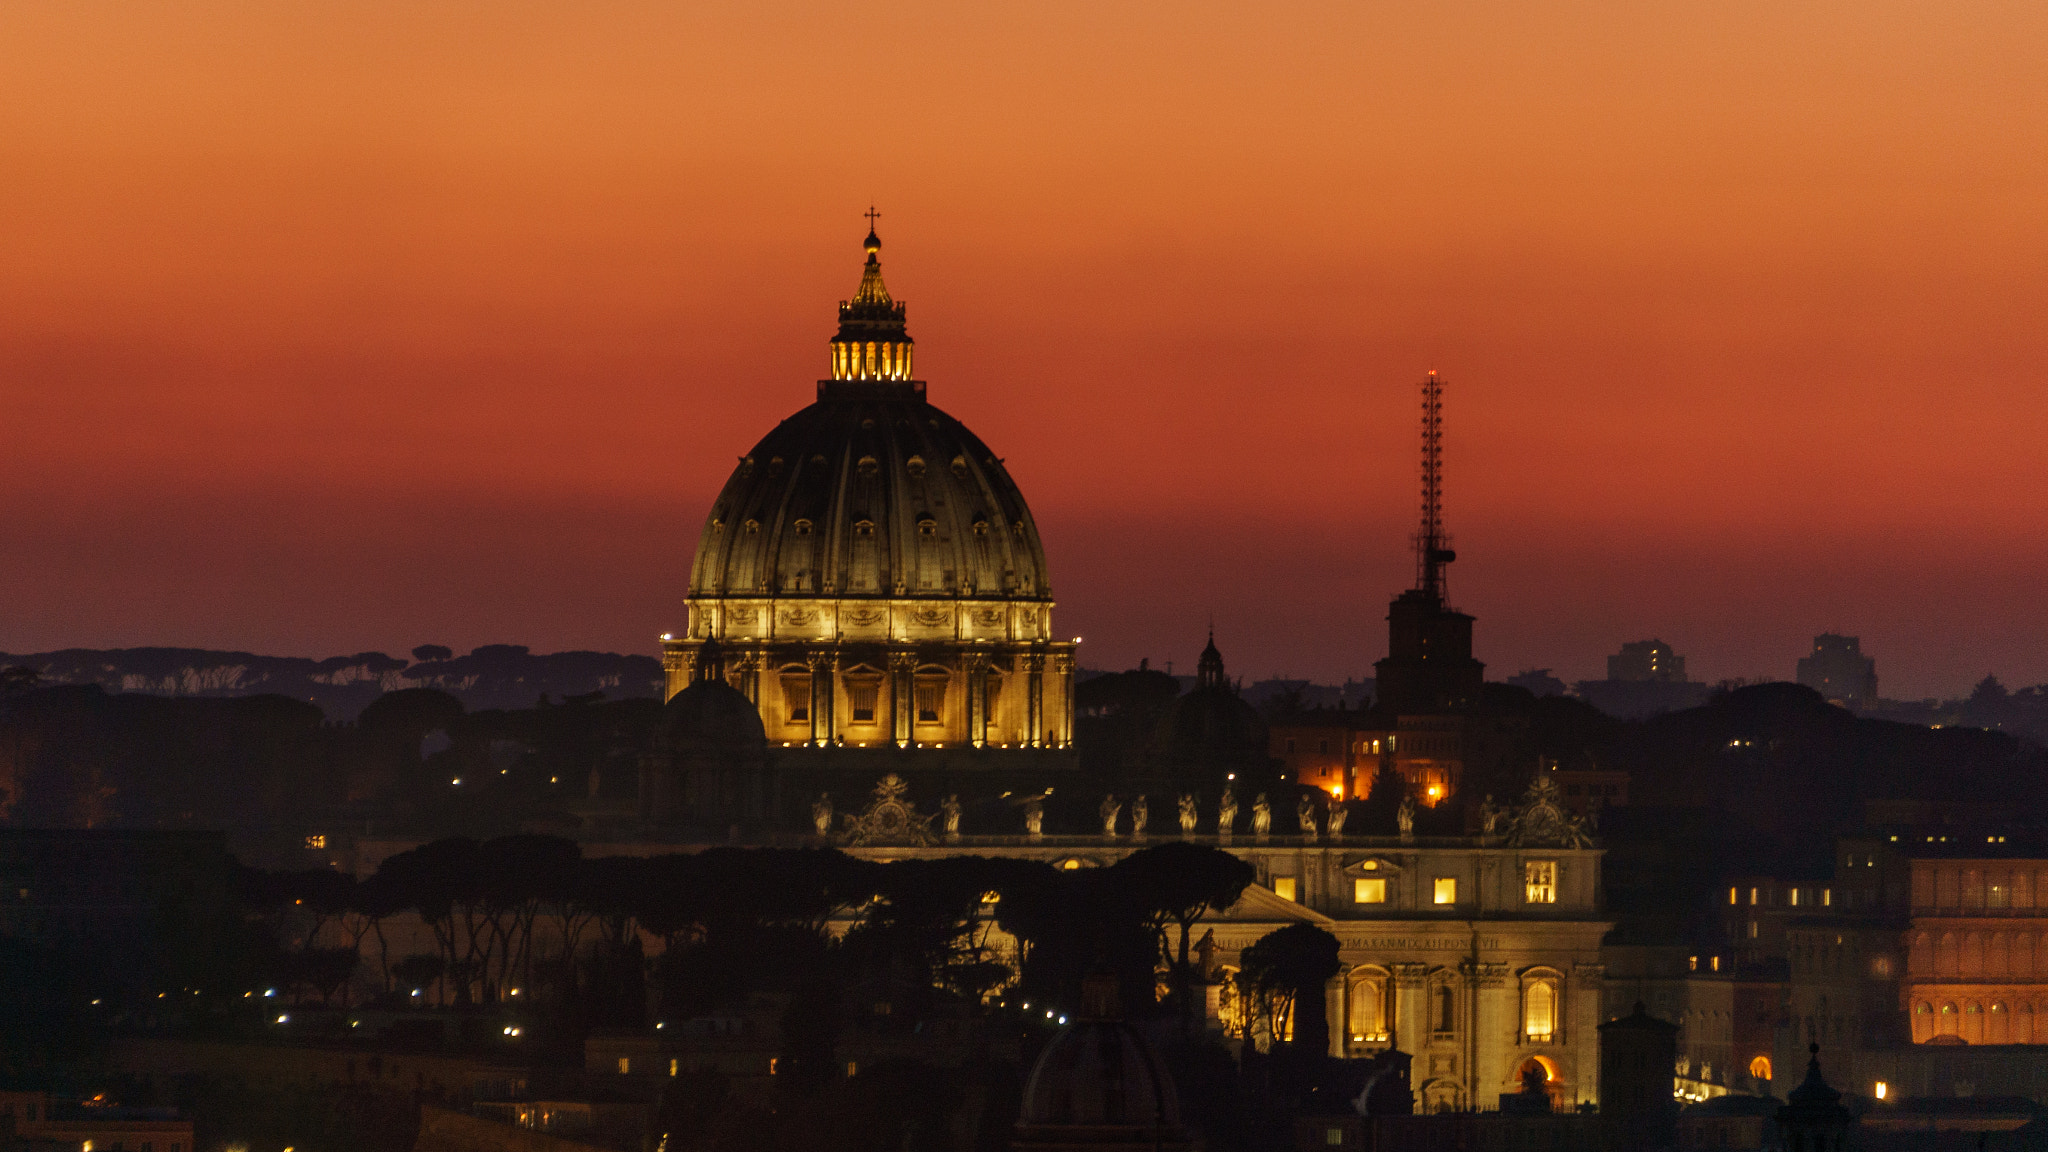 Sony a6300 sample photo. St. peters sunset photography